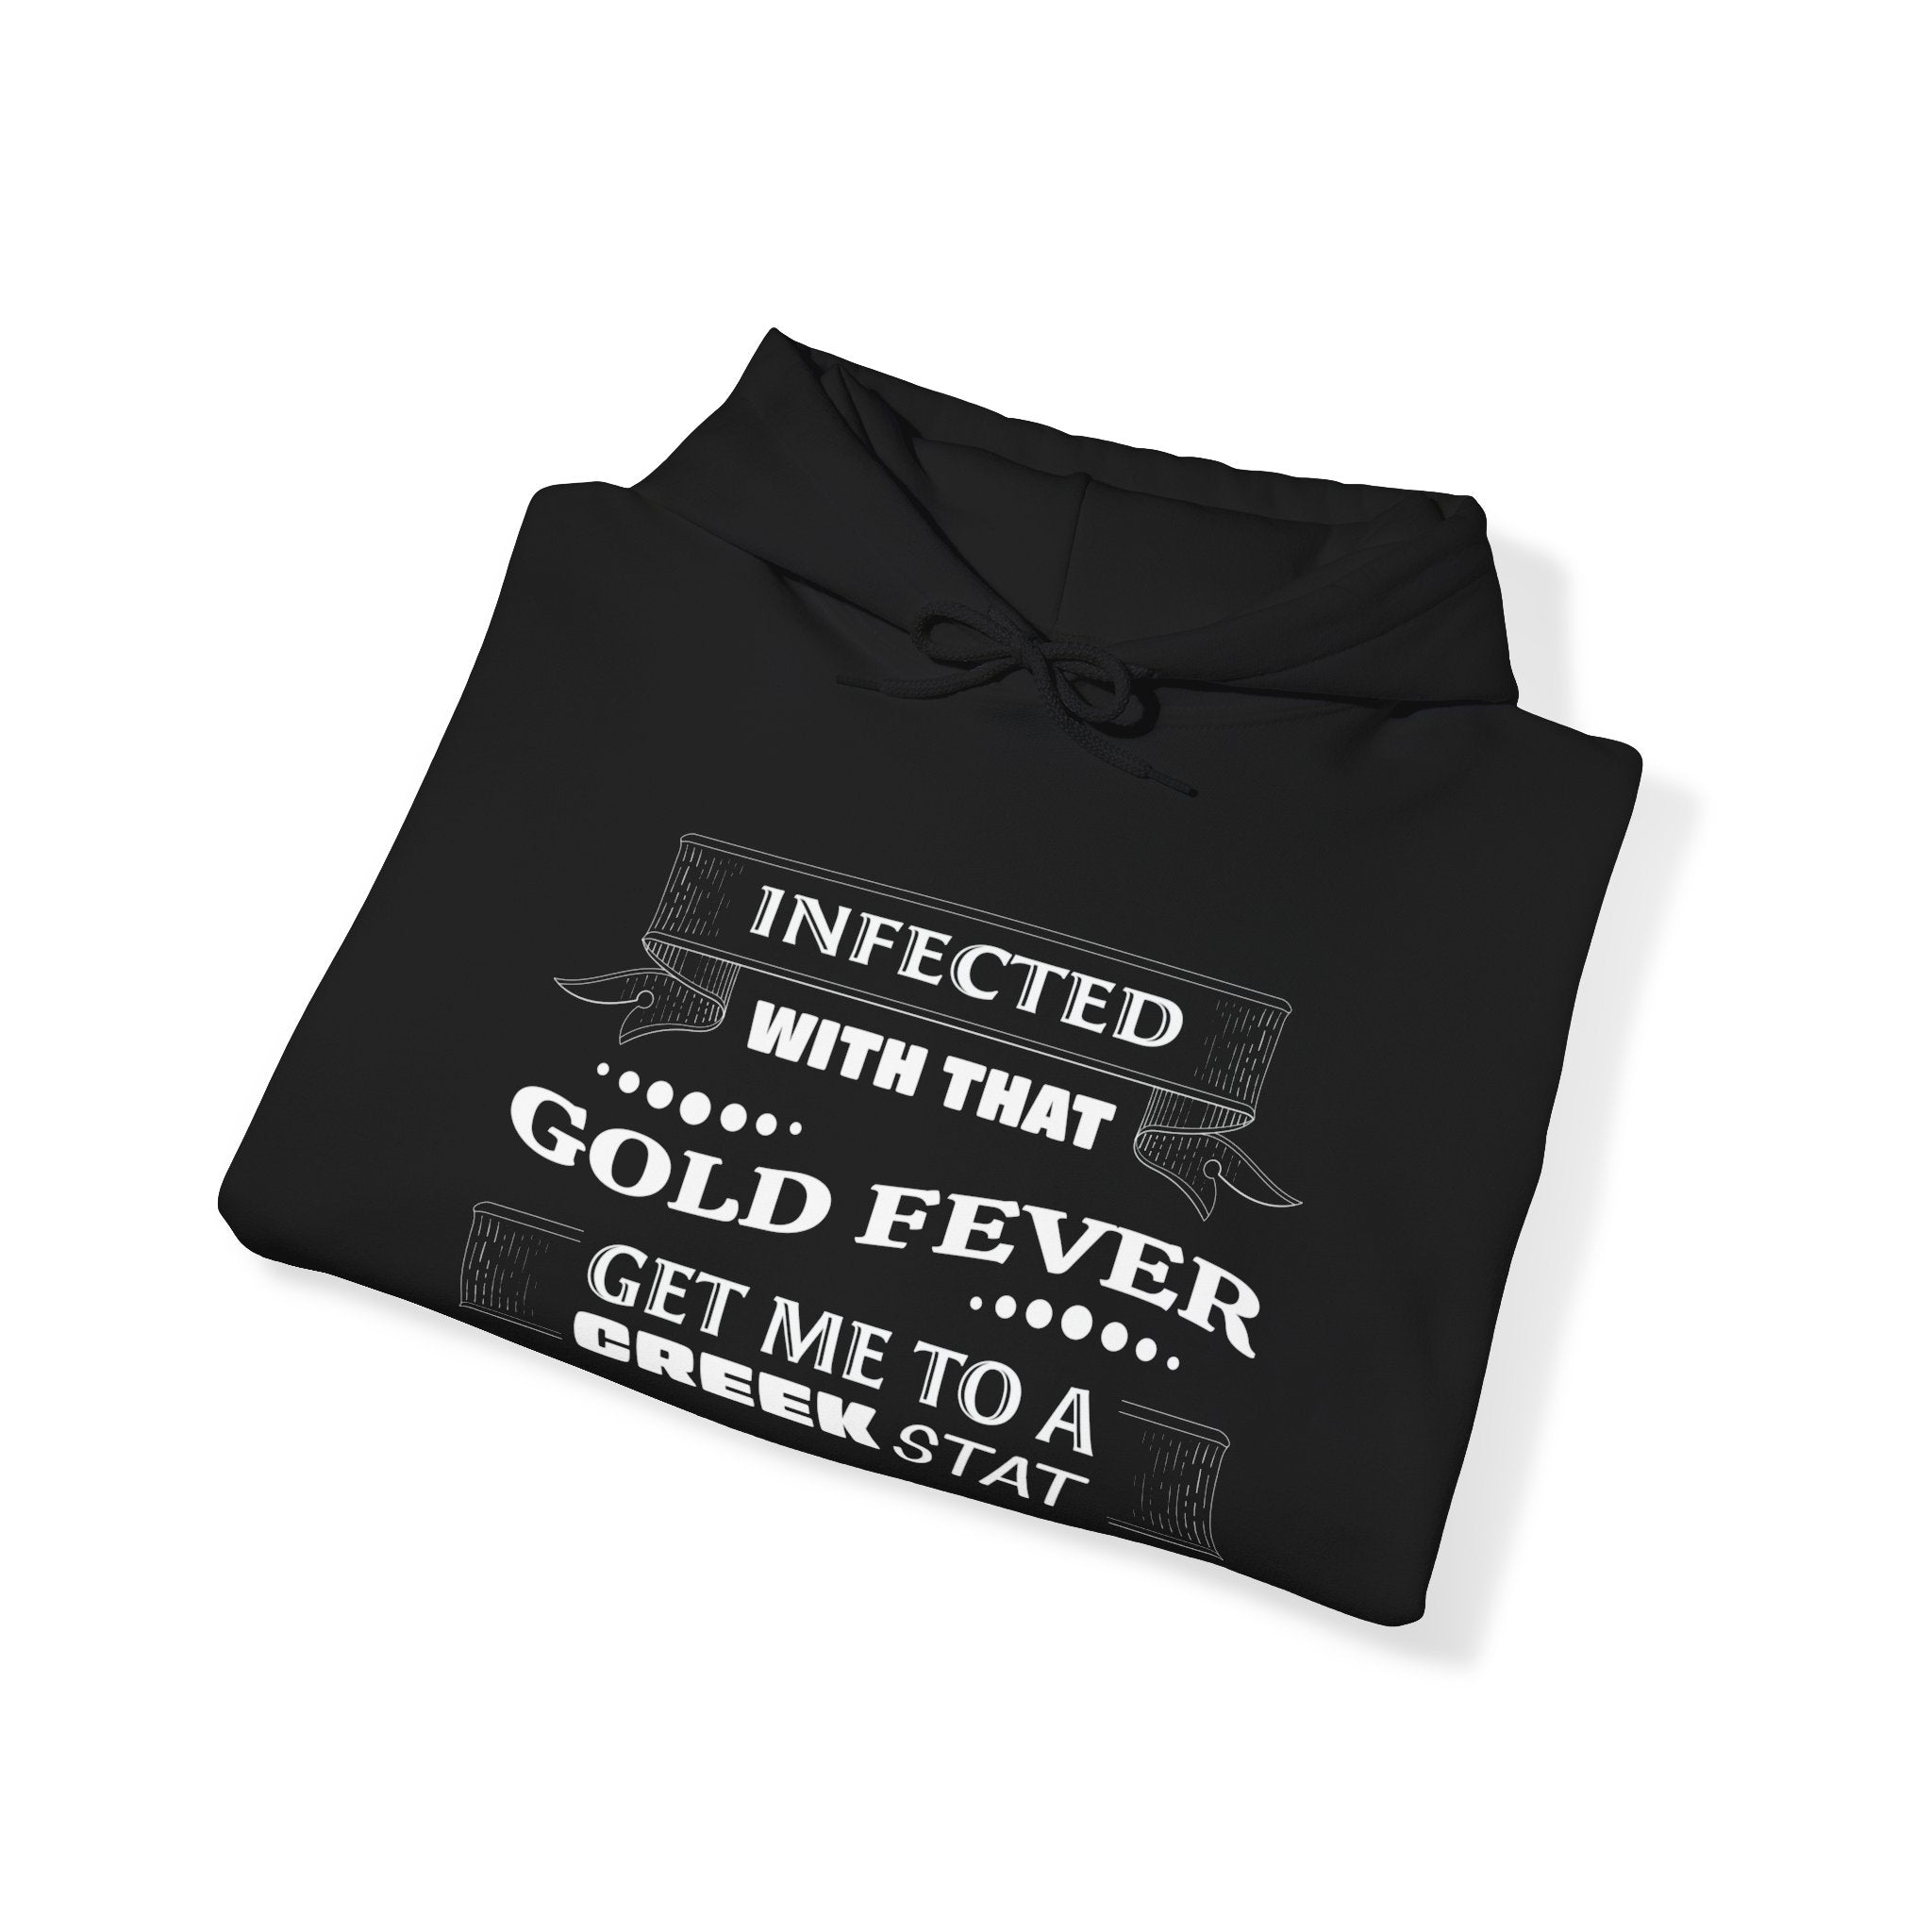 Infected With That Gold Fever Hooded Sweatshirt